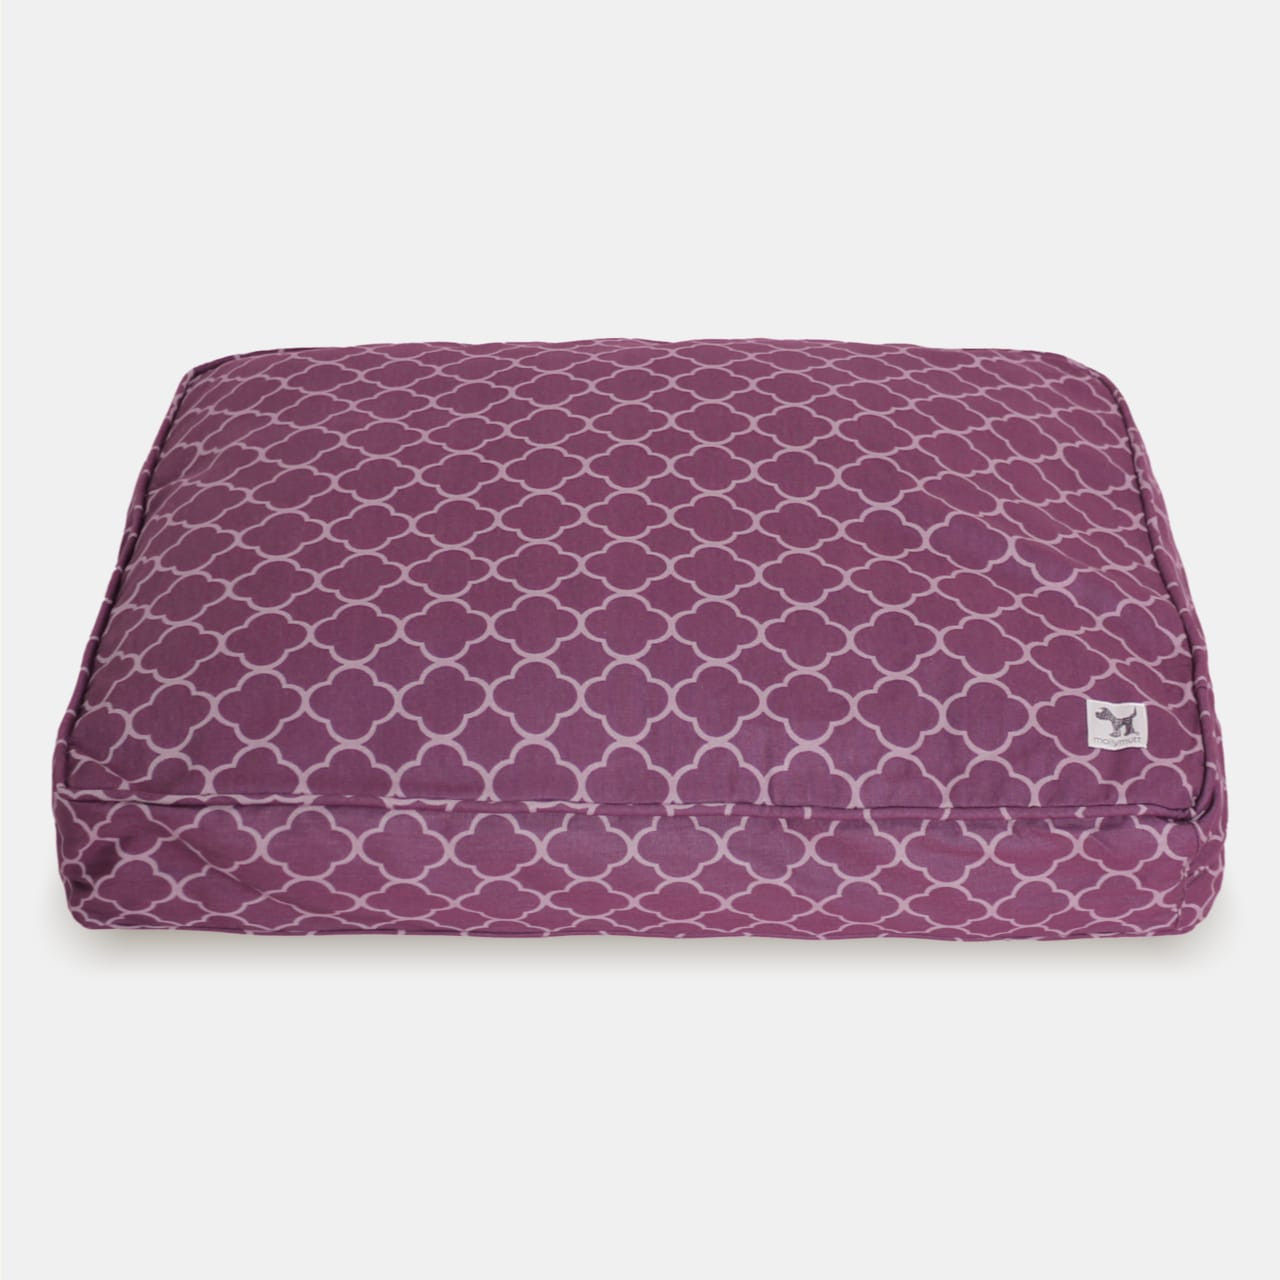 Purple Crate Bed Cover for Dog Kennel Mats & Pads